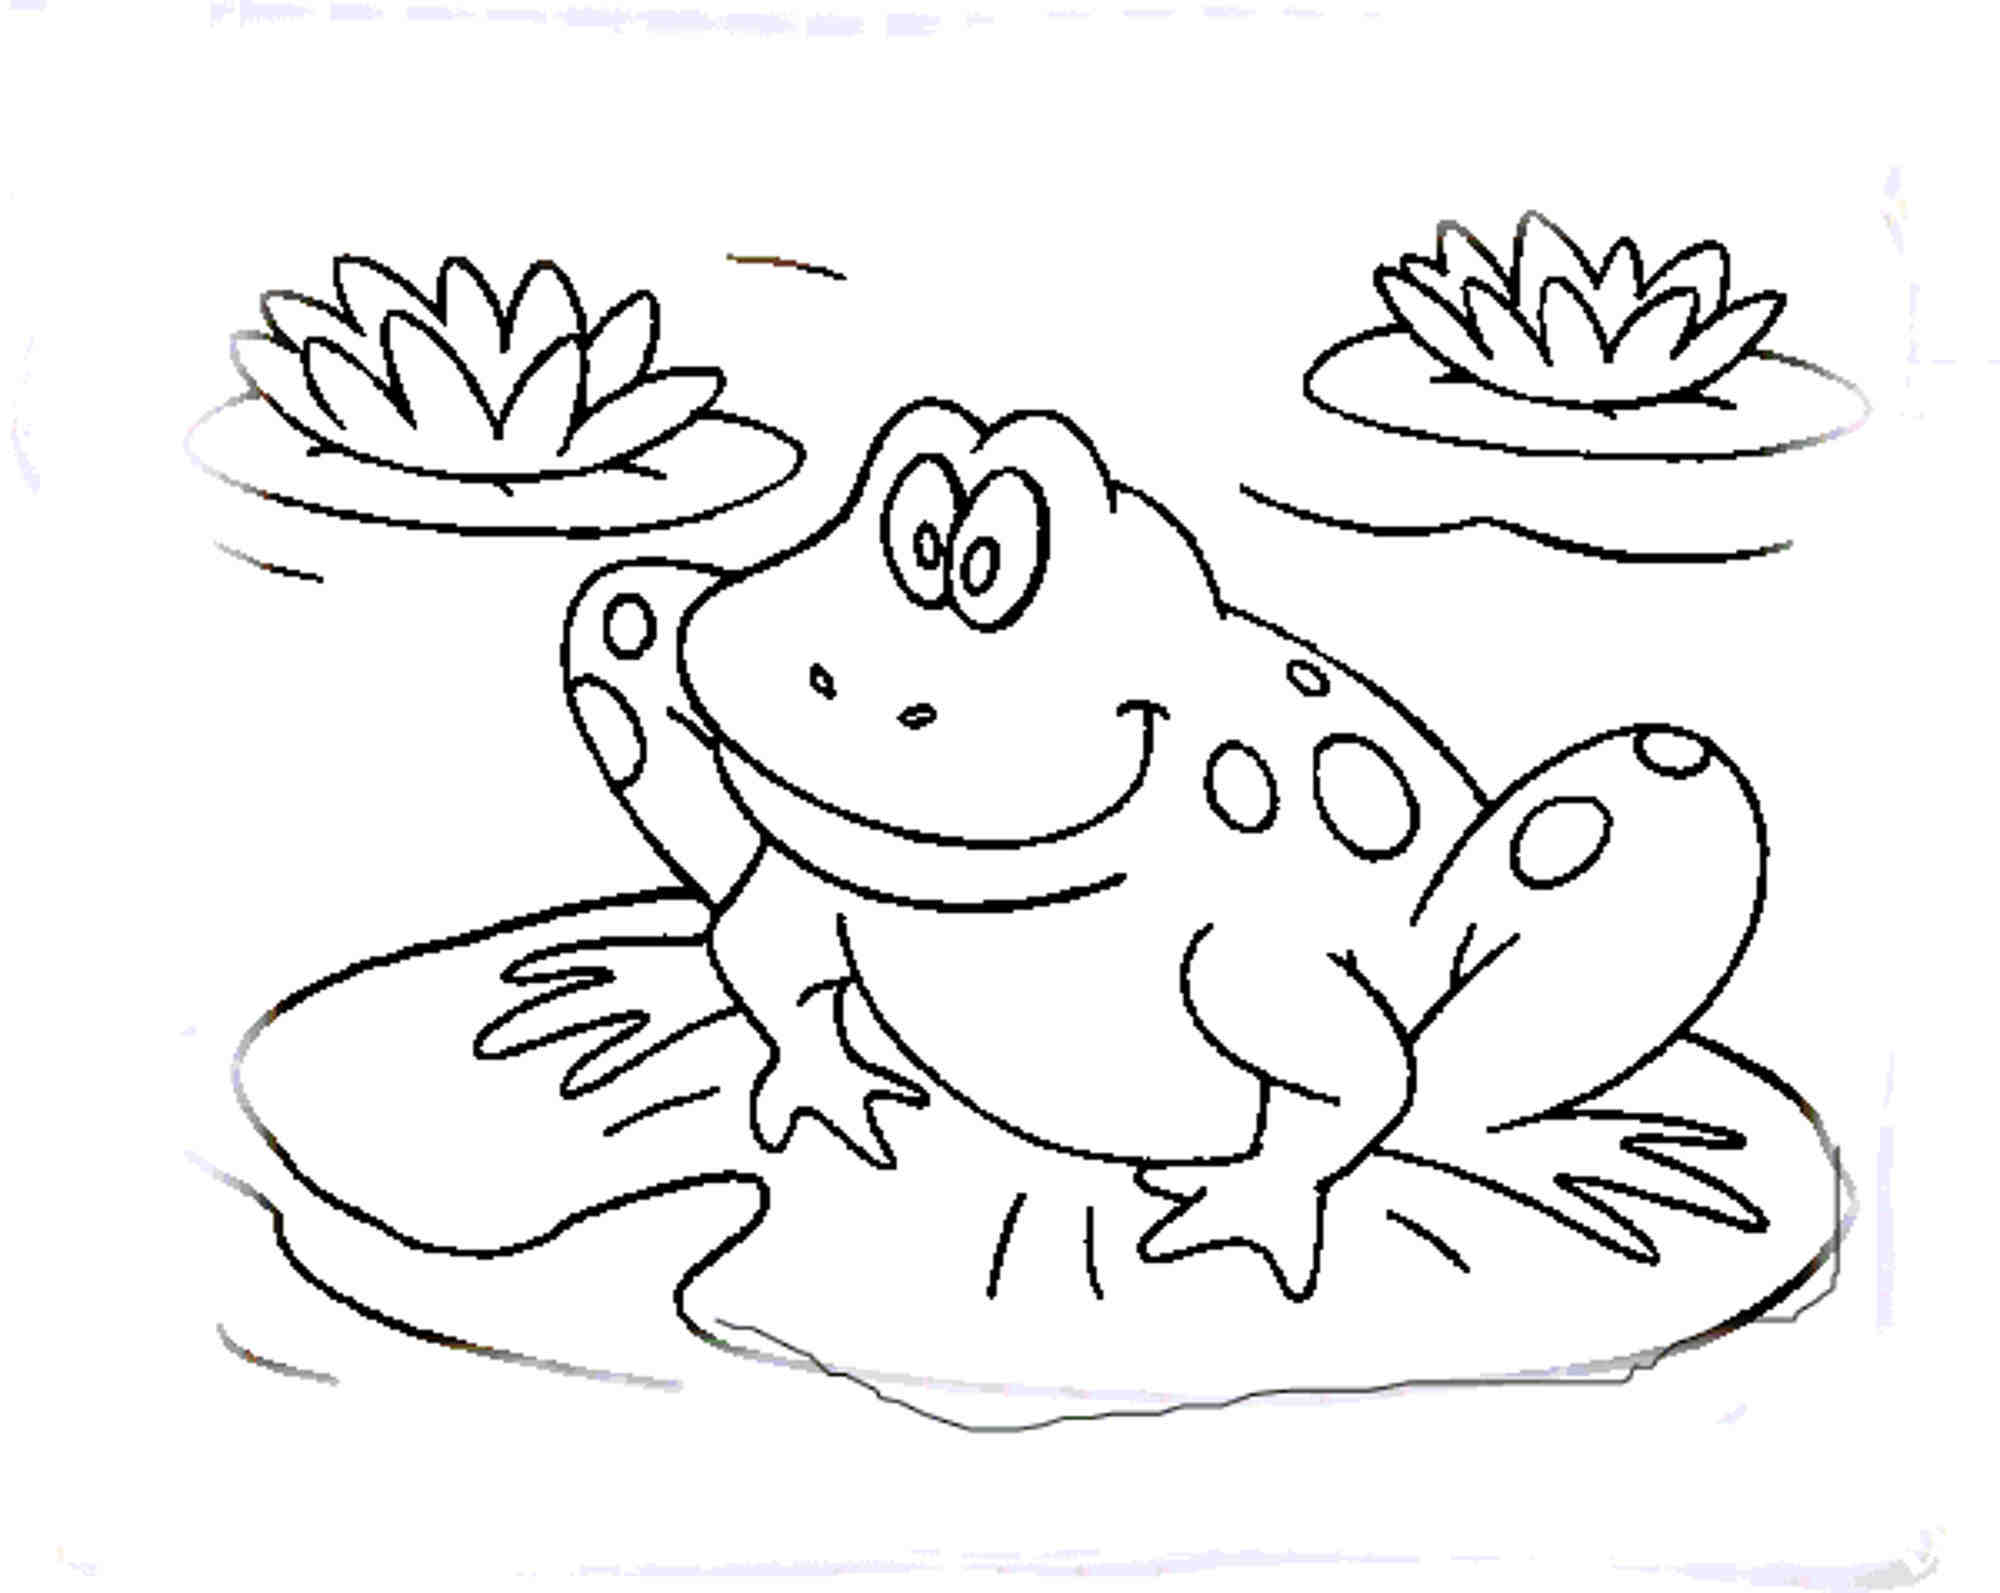 Print & Download - Frog Coloring Pages Theme for Kids